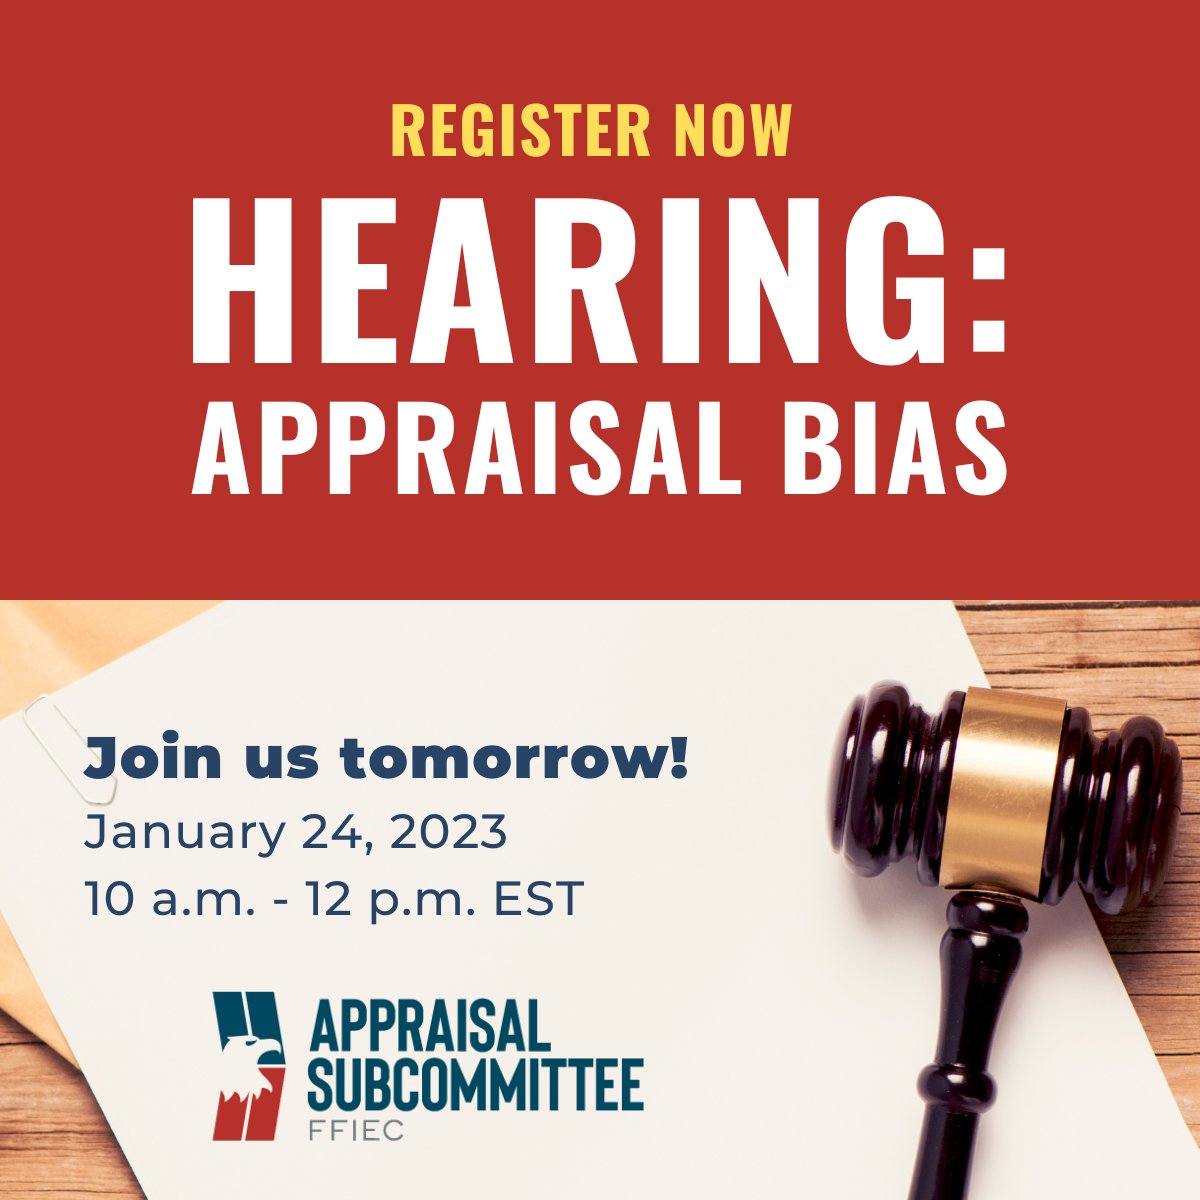 The Appraisal Subcommittee’s Hearing on Appraisal Bias is just one day away! Don’t miss your last chance to register to attend virtually tomorrow, January 24, 2023 from 10 a.m. to 12 p.m. EST:  surveys.consumerfinance.gov/jfe/form/SV_cJ…

#ASCgov #AppraisalBias